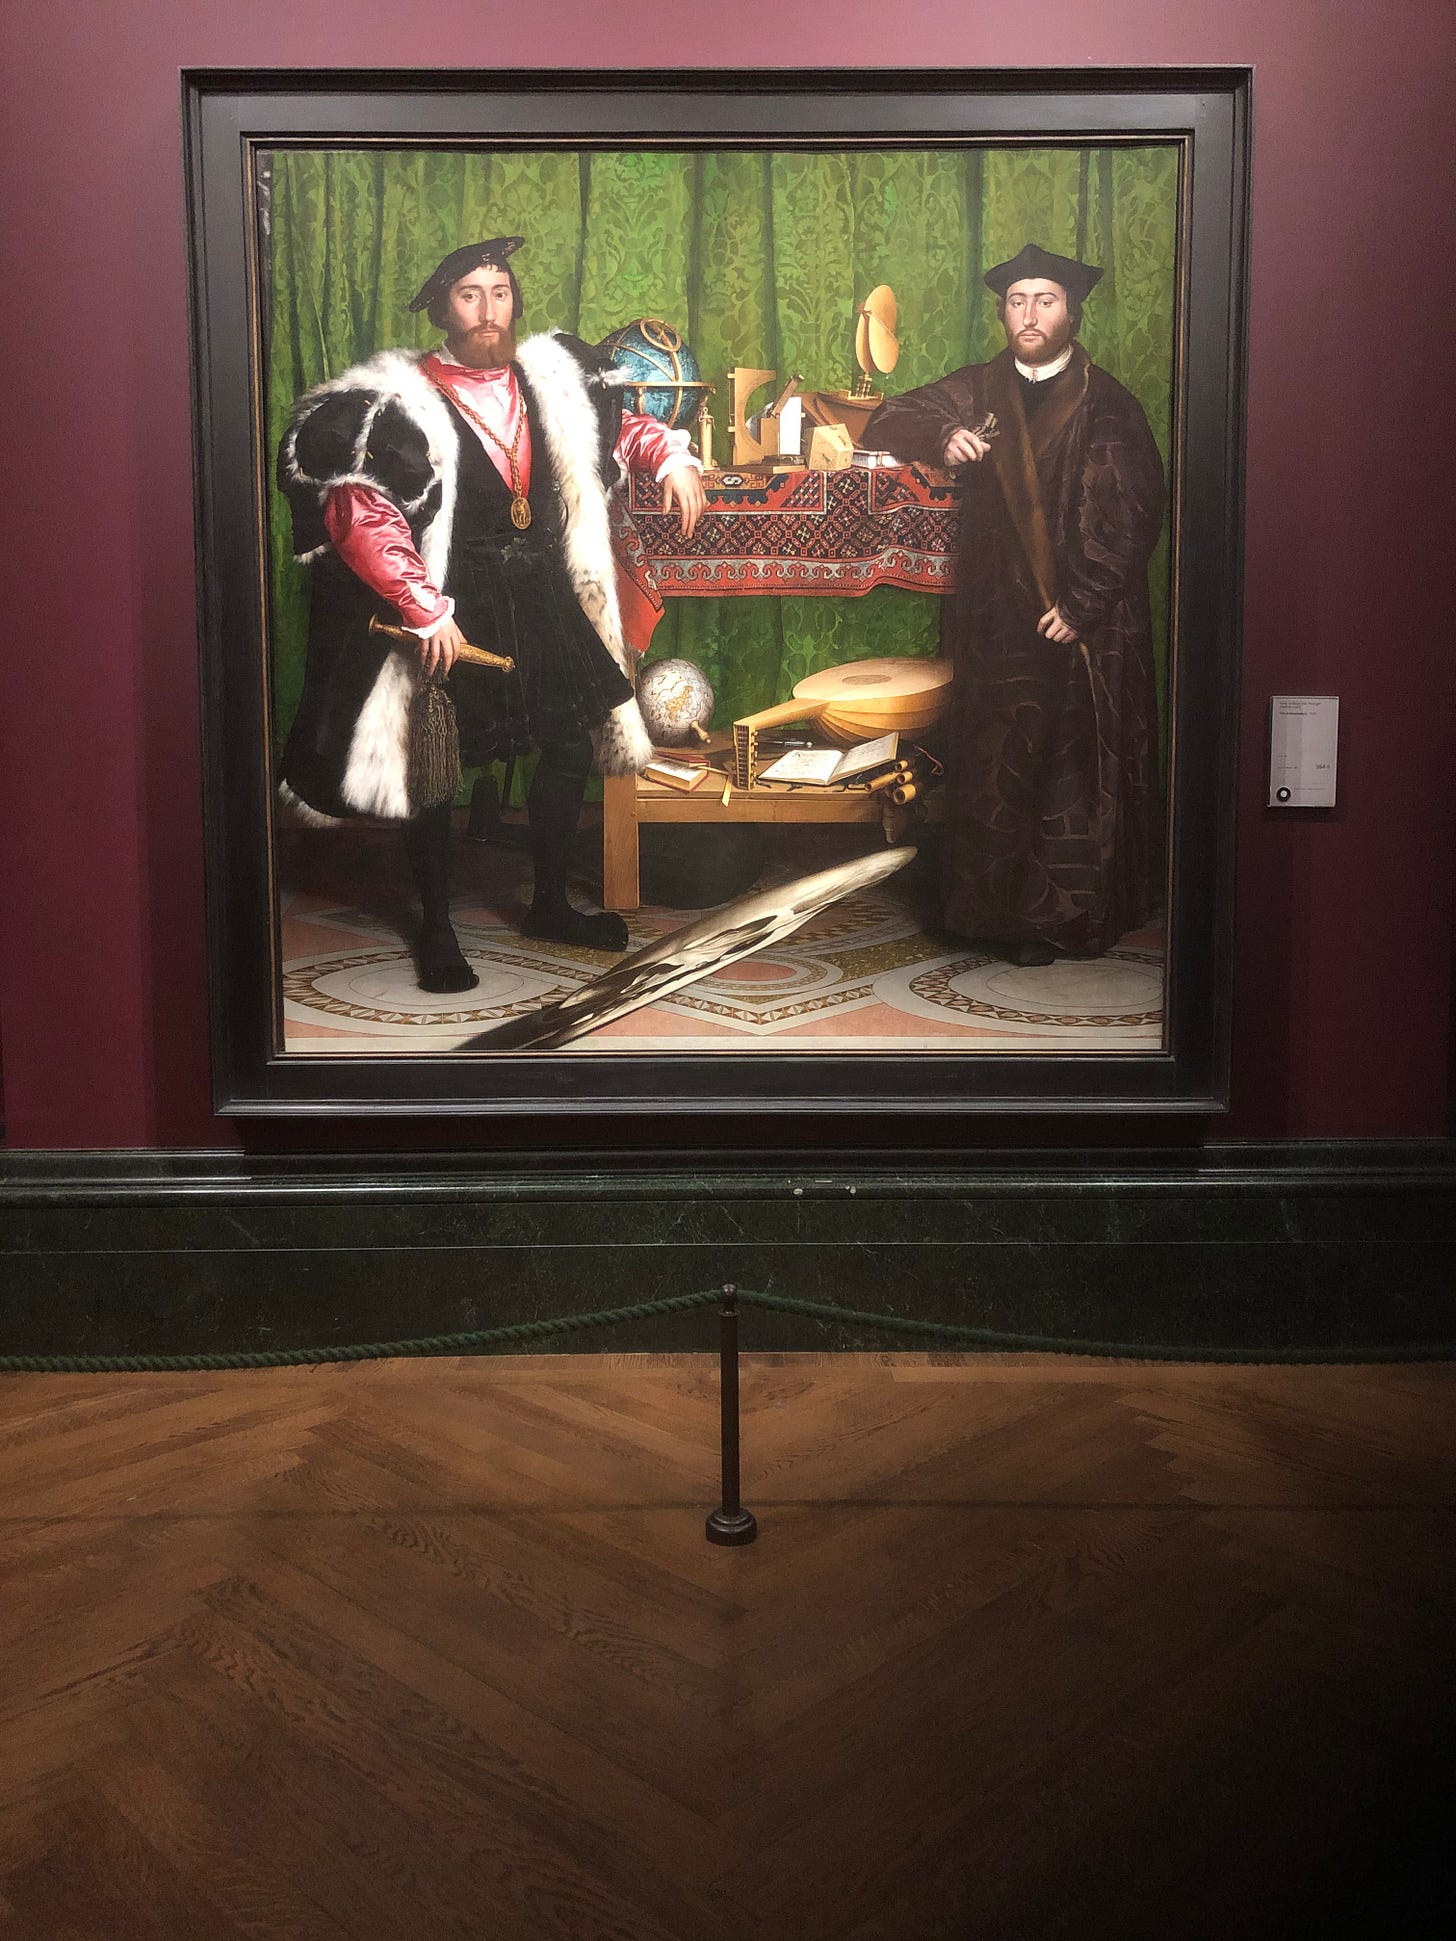 A painting of two C16th men, standing before a table and a green damask curtain. The men are well dressed and clearly of some importance. Various items are placed upon the table - a globe, mathematical instruments, a lute and sheet music. A strange image at the front of the painting is a distorted skull.